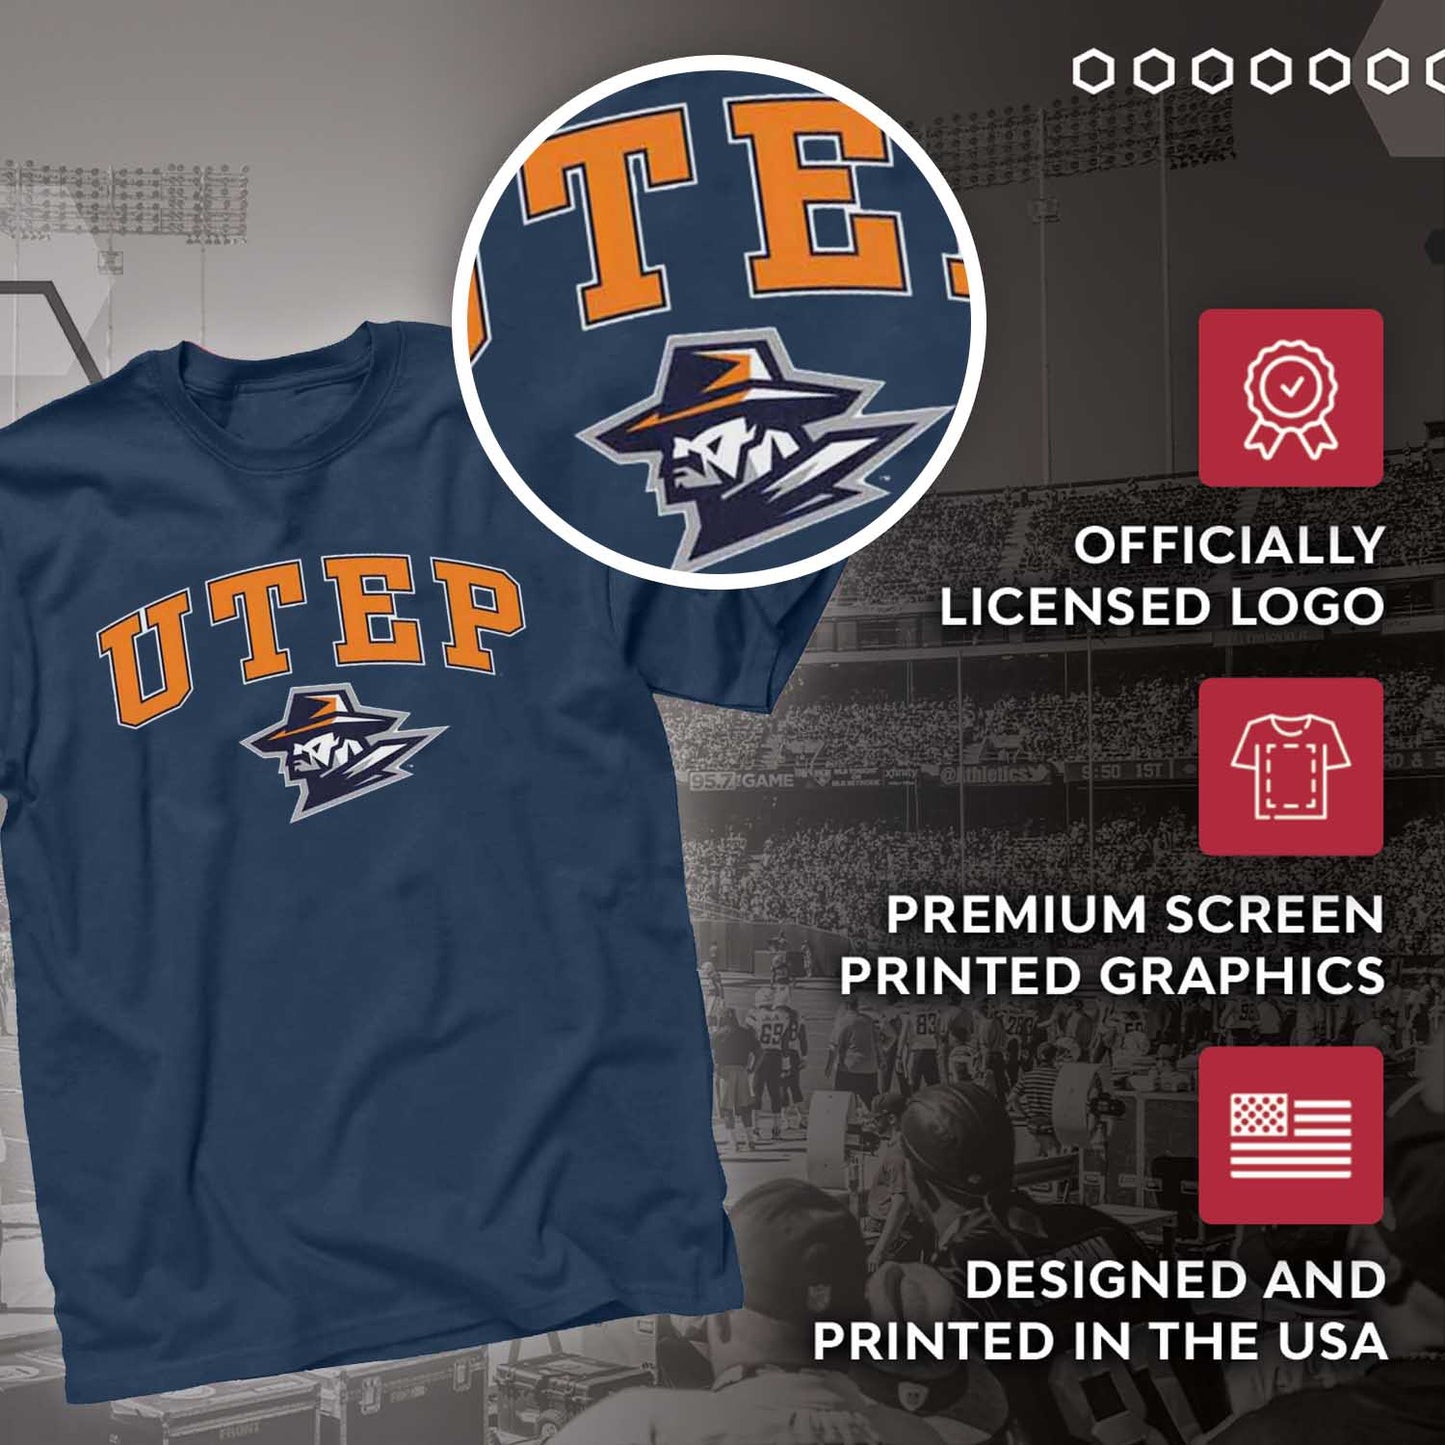 UTEP Miners NCAA Adult Gameday Cotton T-Shirt - Navy